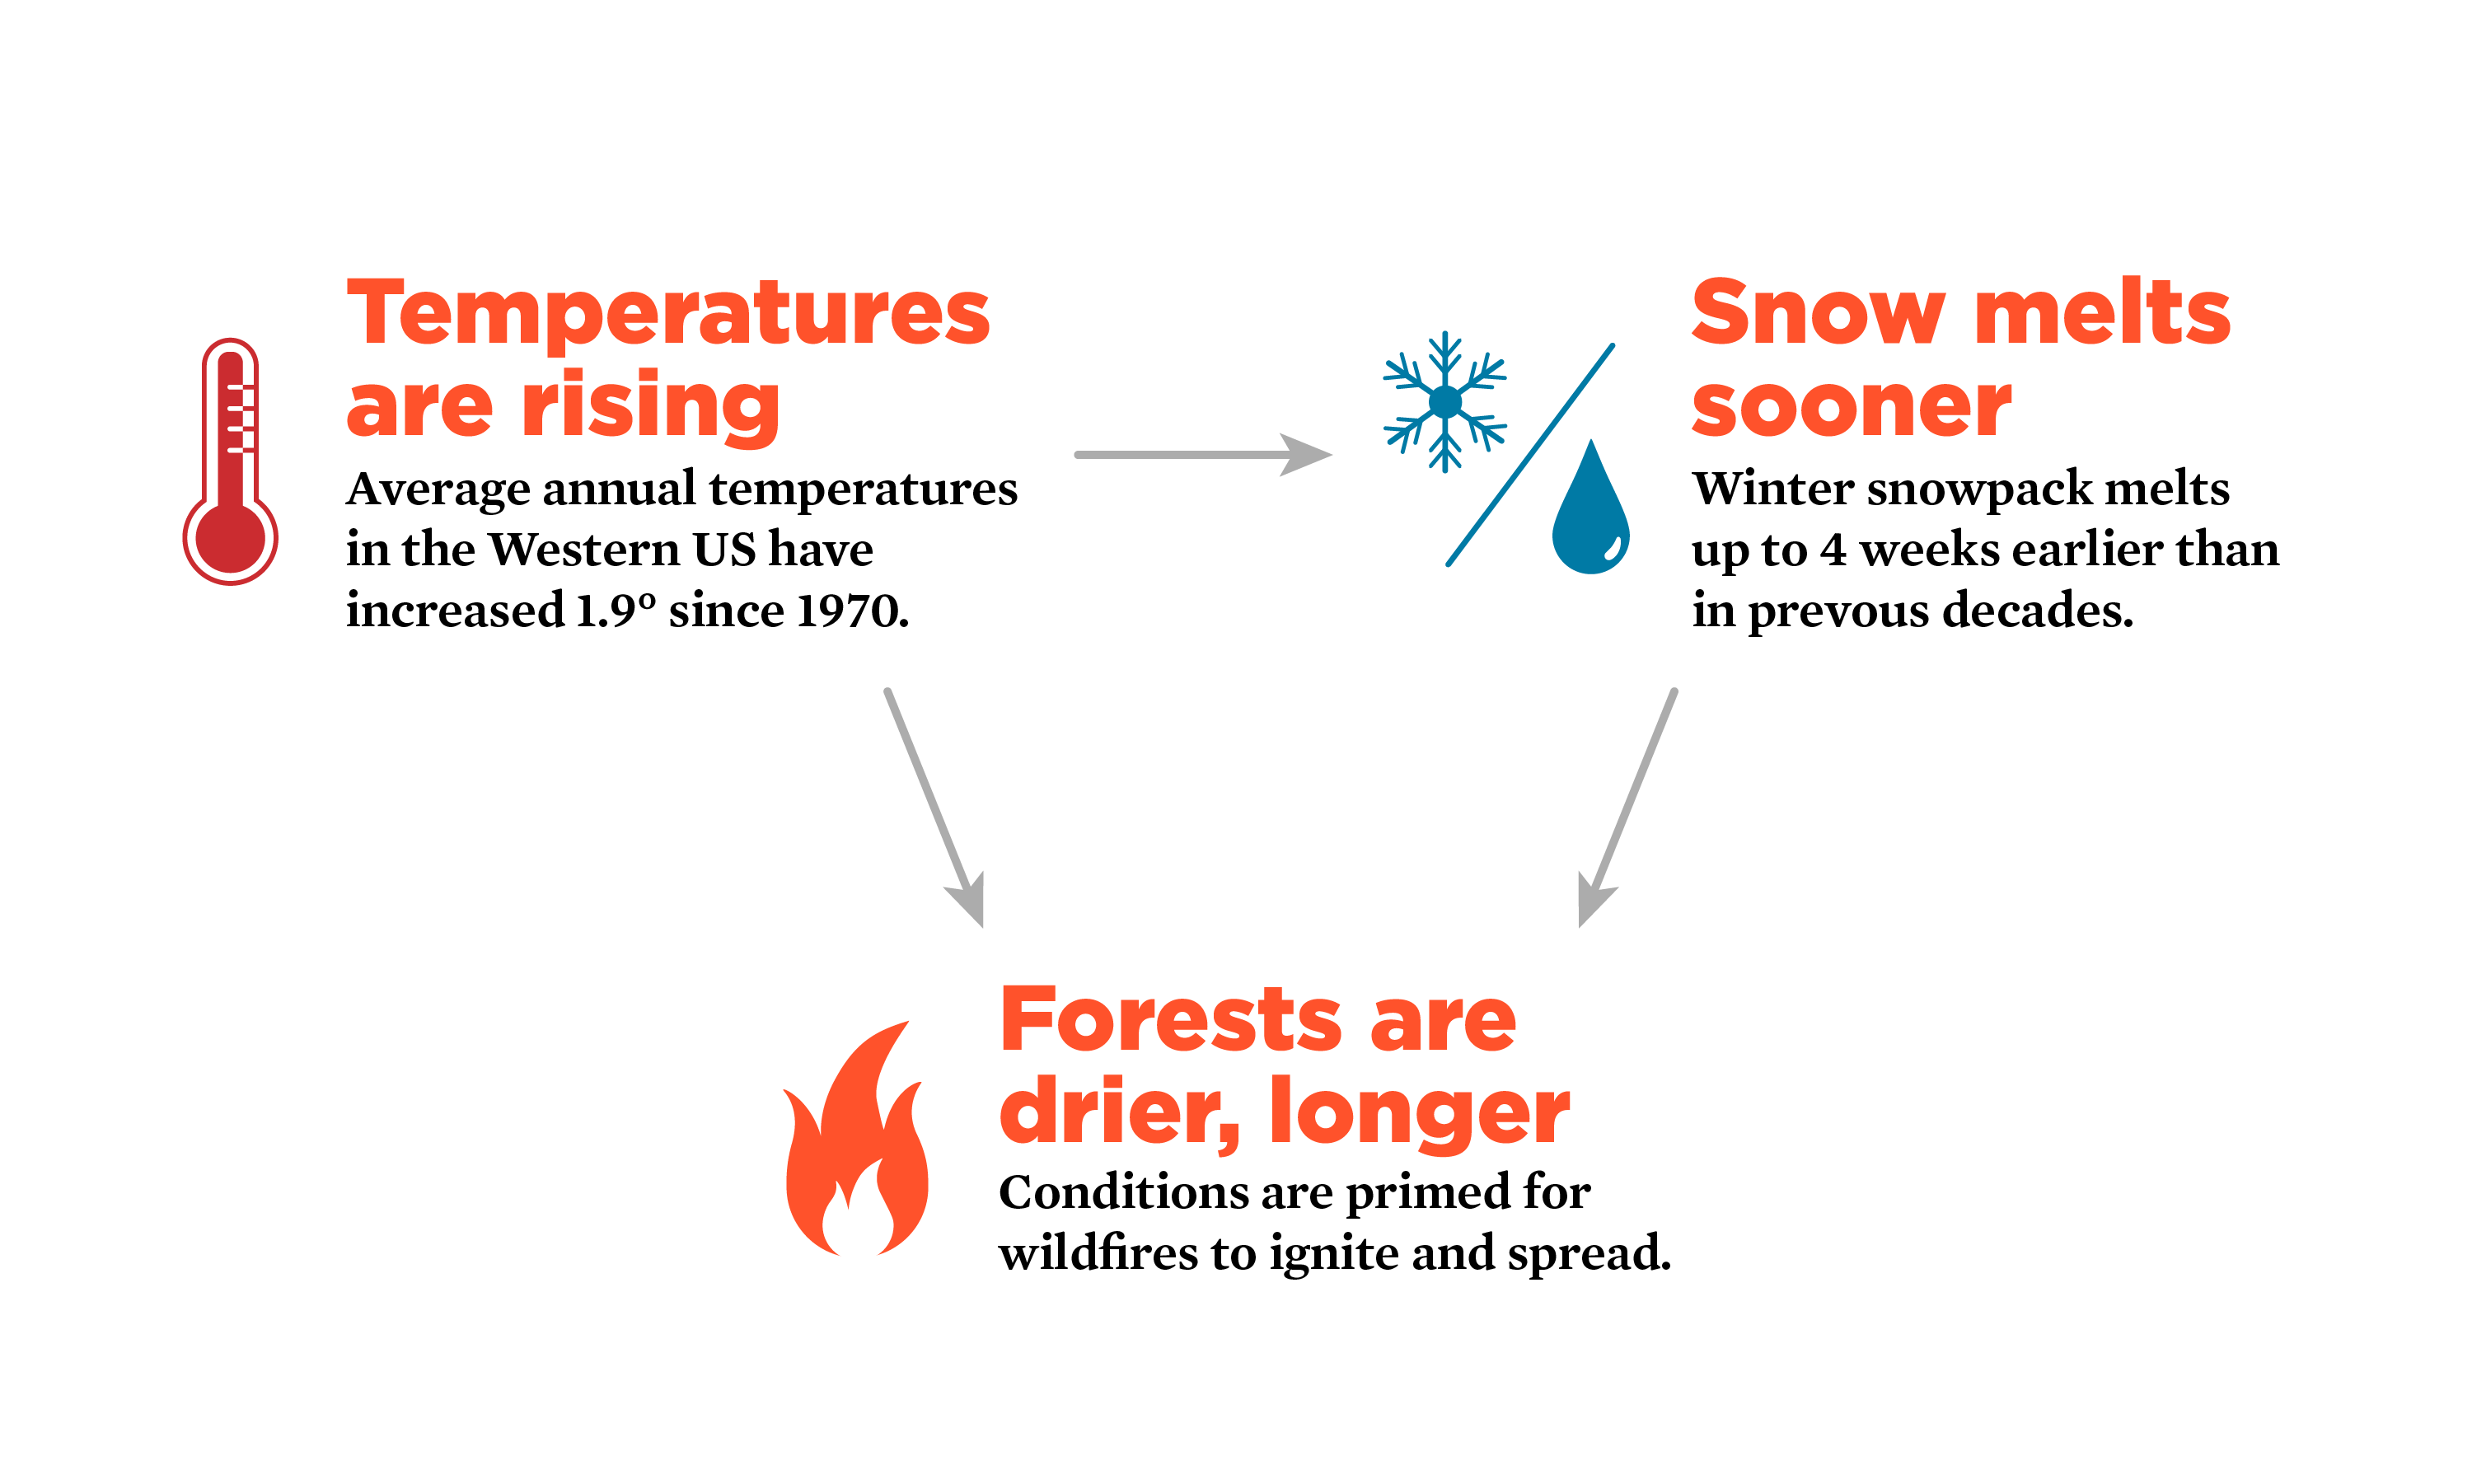 A flow chart showing how global warming relates to forest fires. As temps go up, snow melts sooner and forests stay drier, longer.